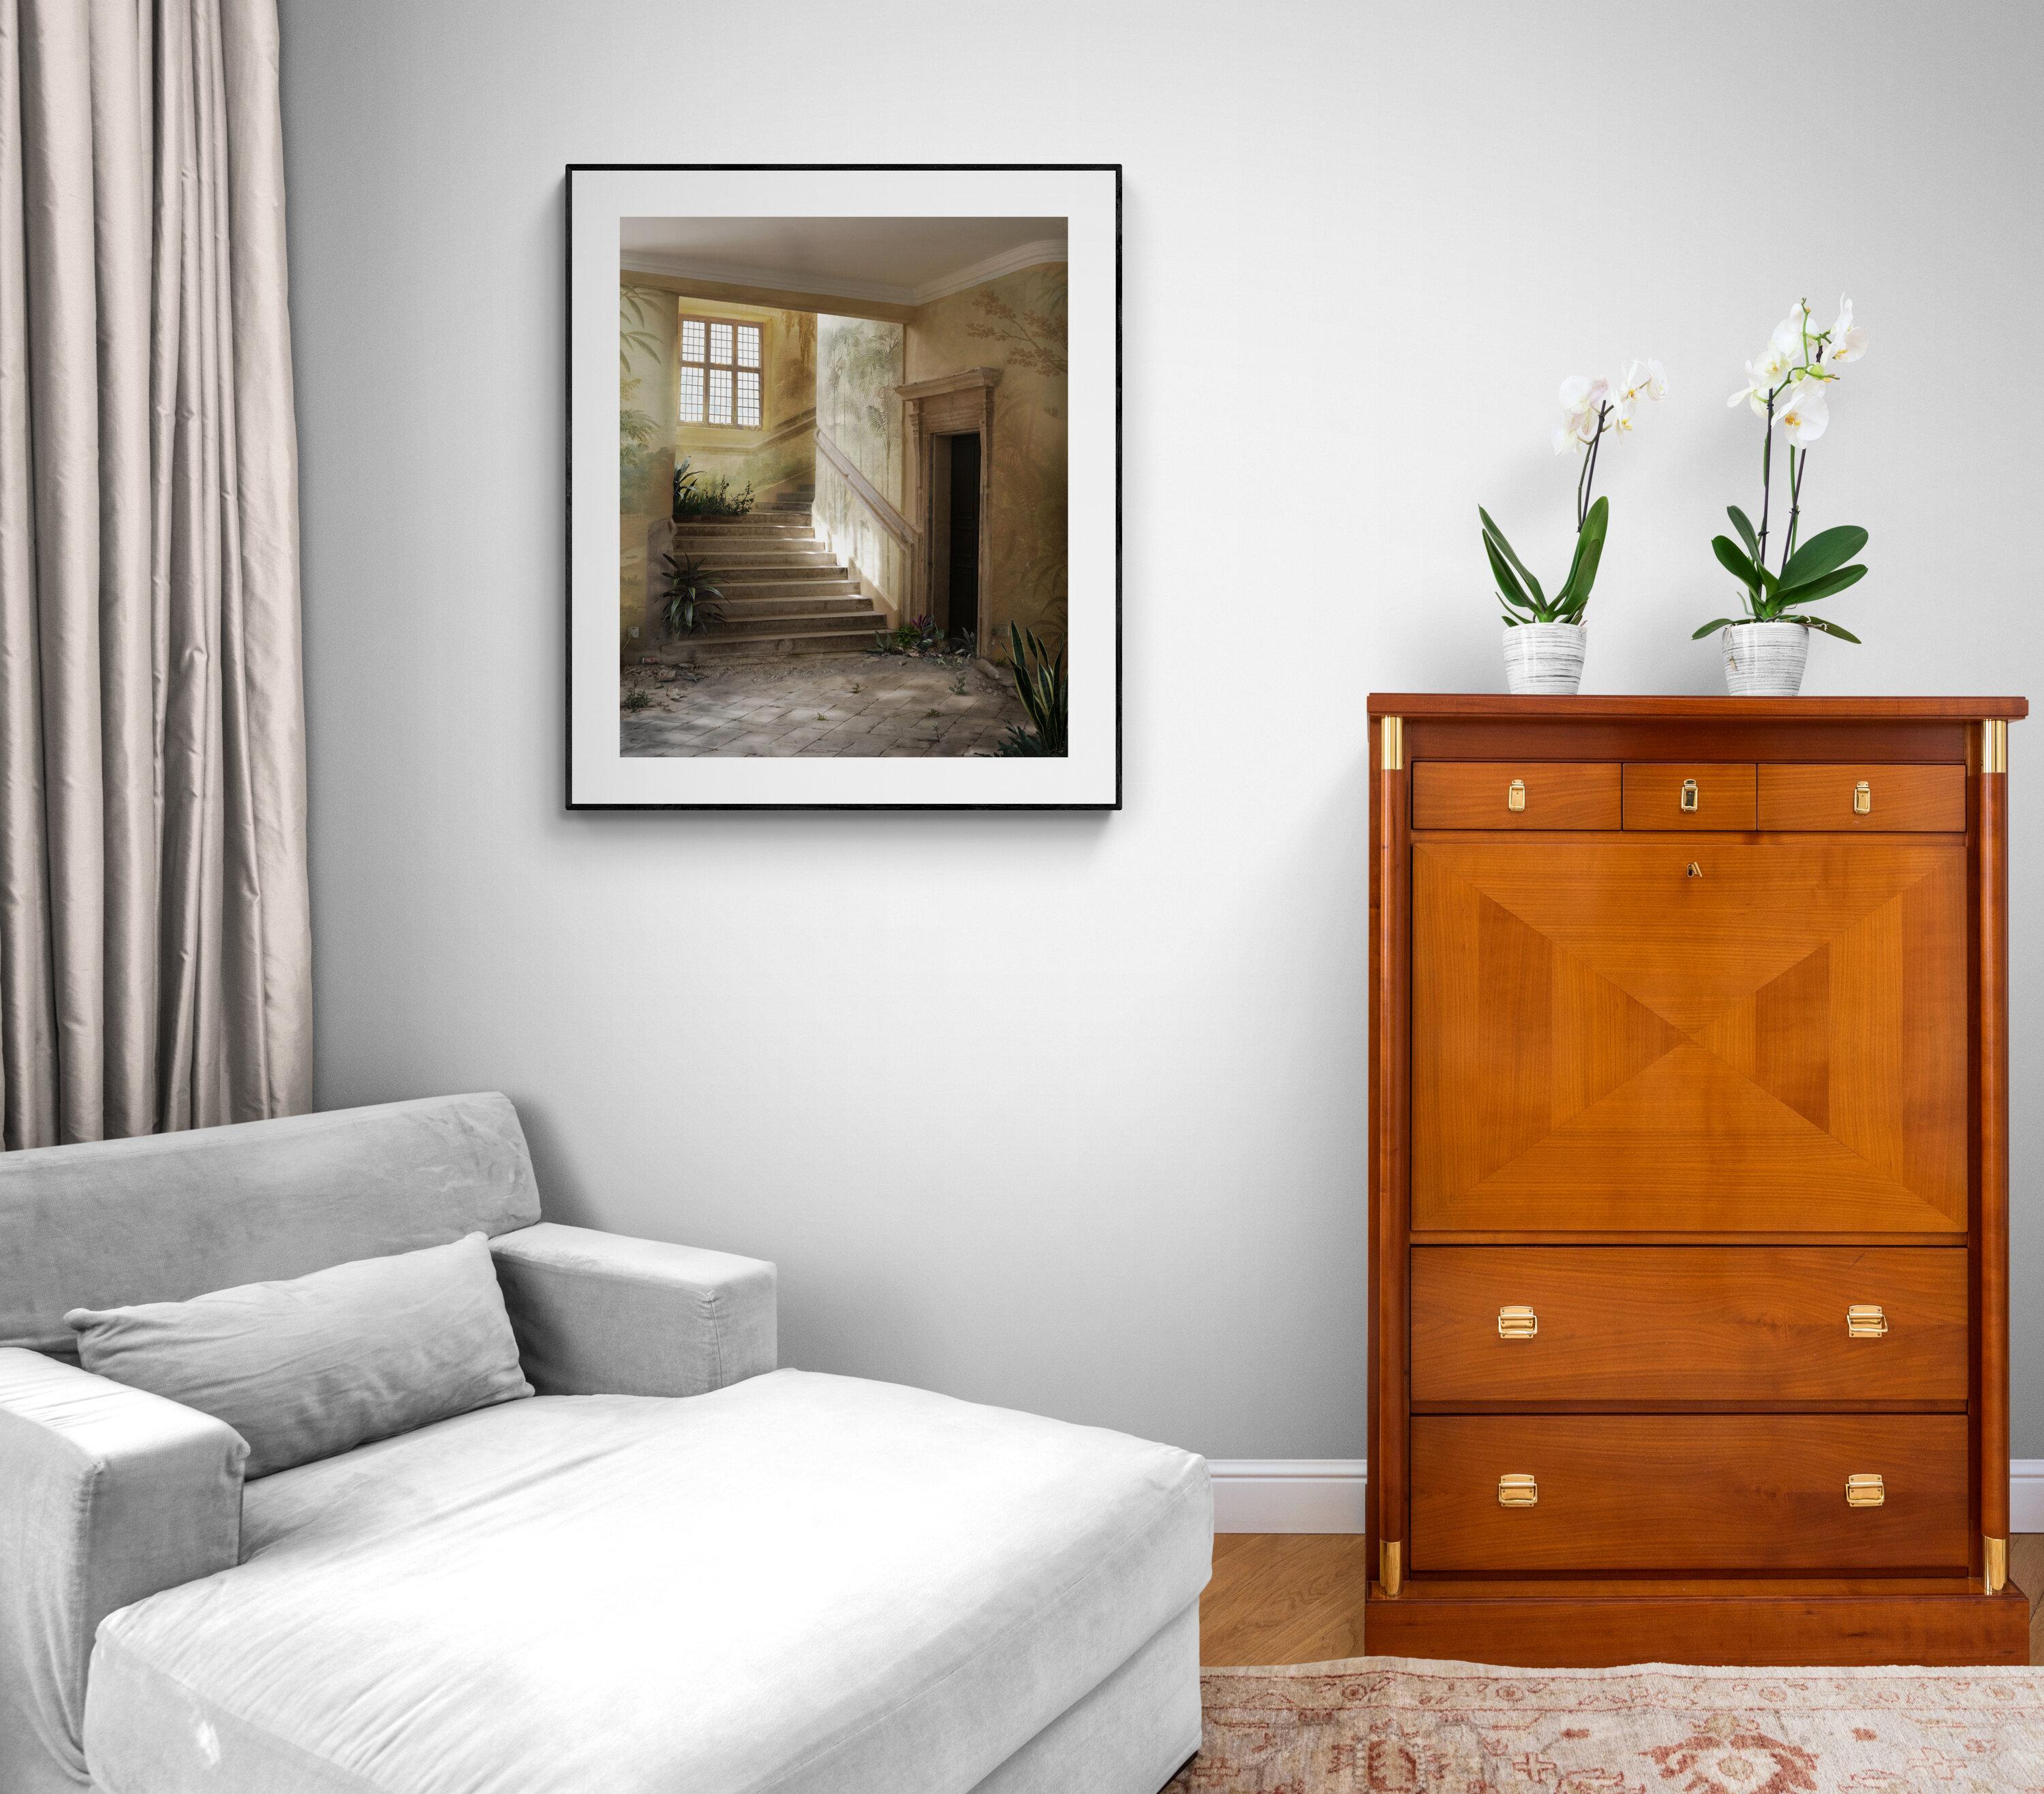 Rockery - Interiors Photography, Fenster, Staircase im Angebot 1